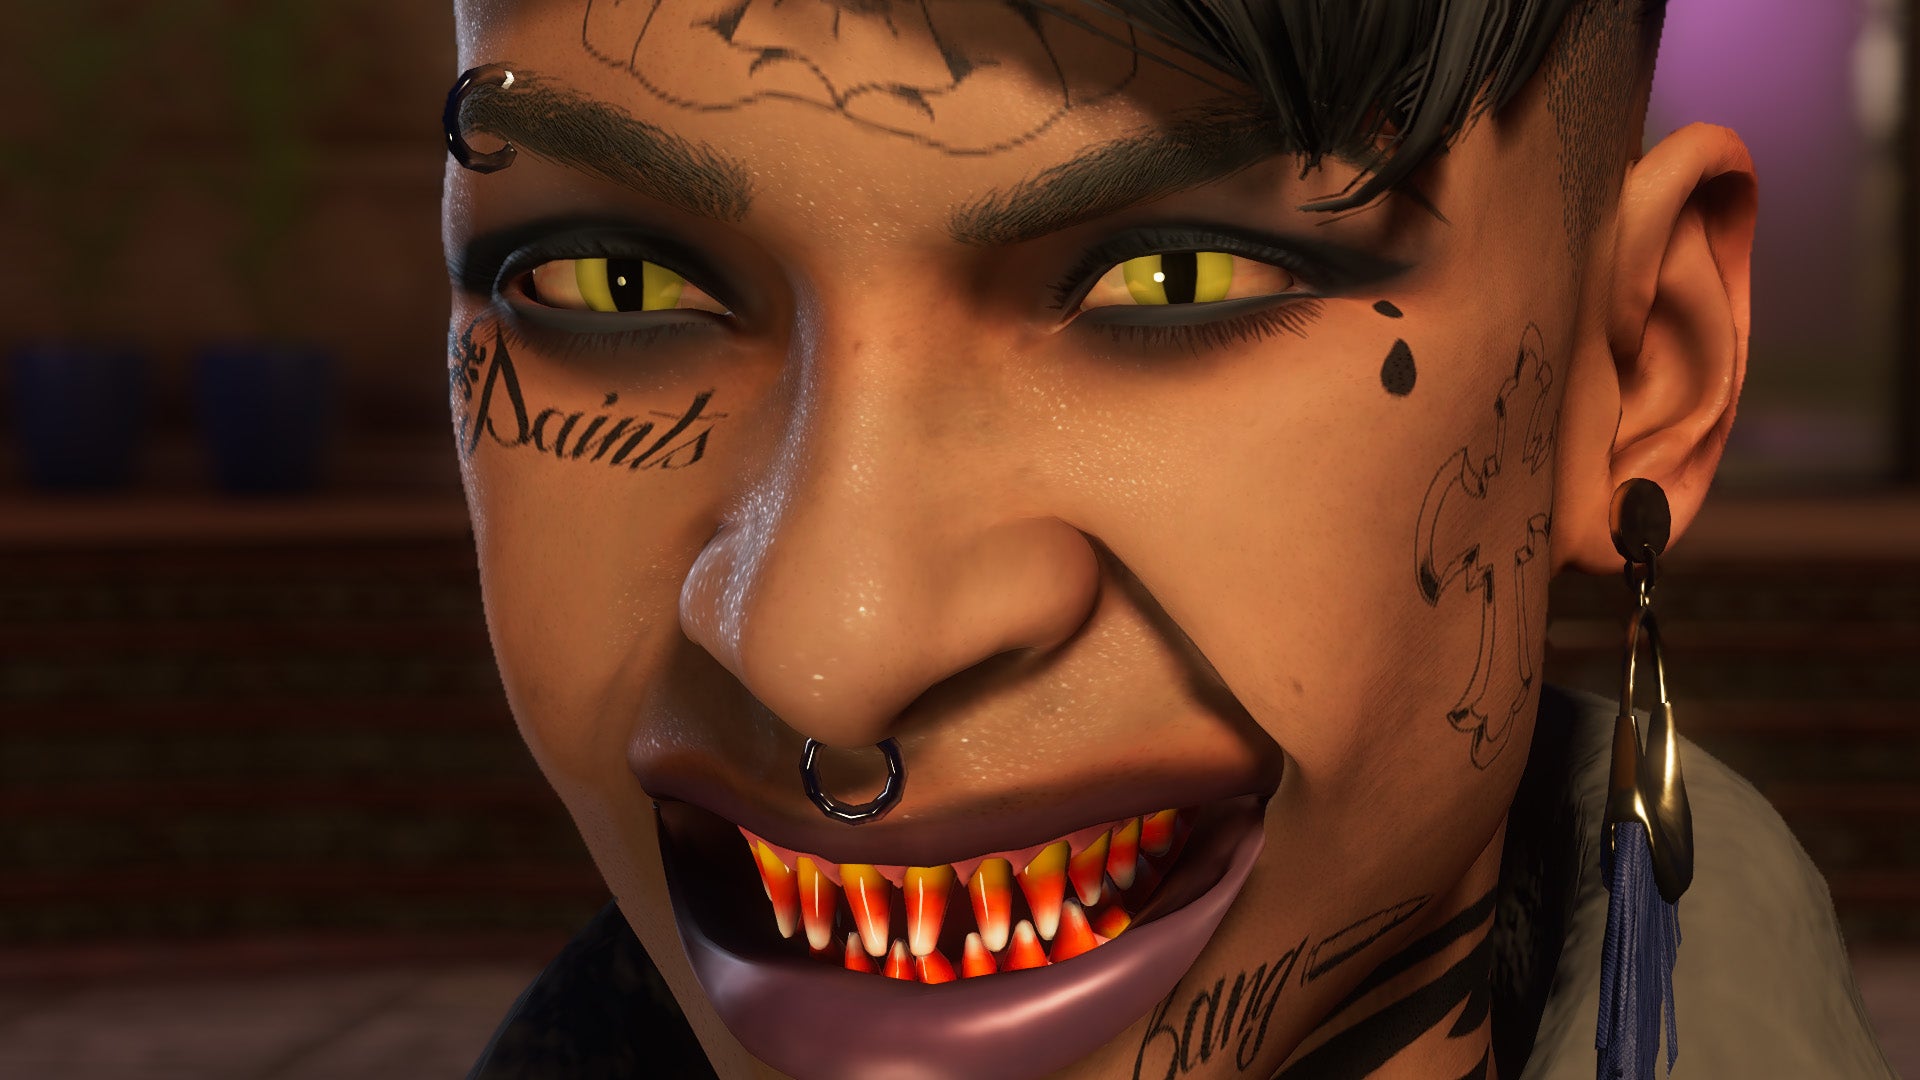 Henderson: Saints Row character editor to be released separately - before game release (free!)